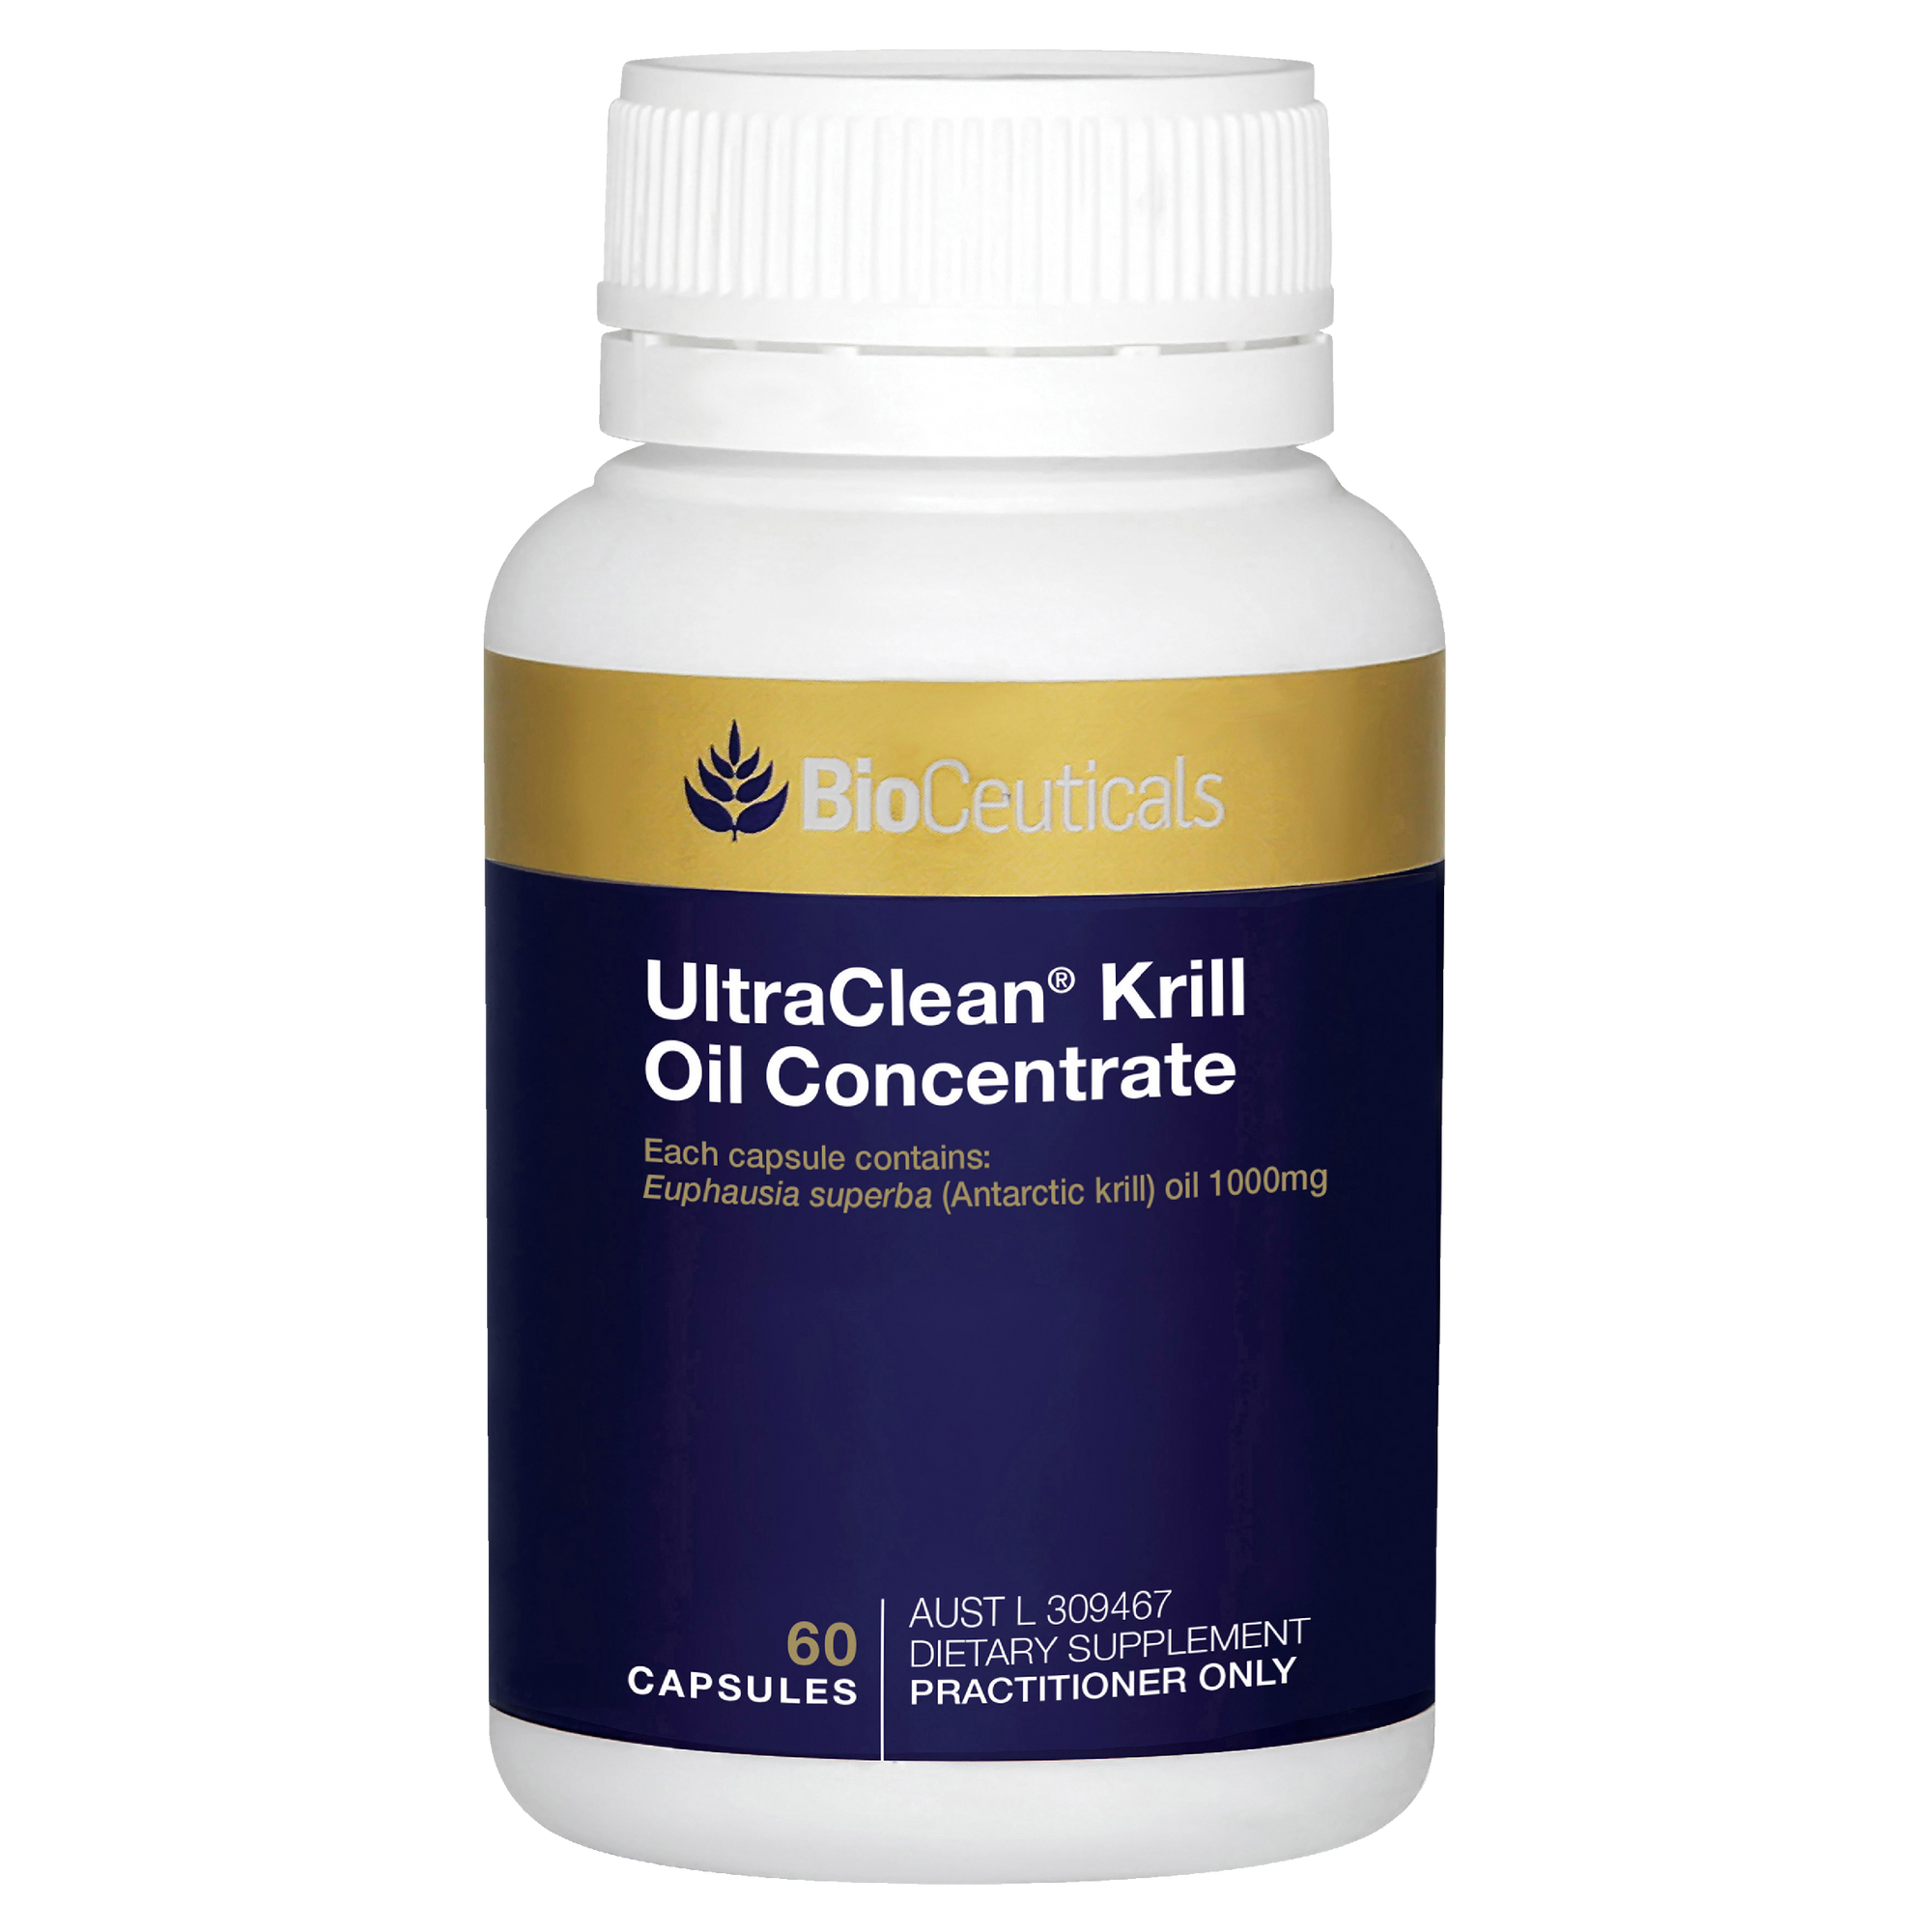 BioCeuticals UltraClean® Krill Oil Concentrate 60 Capsules